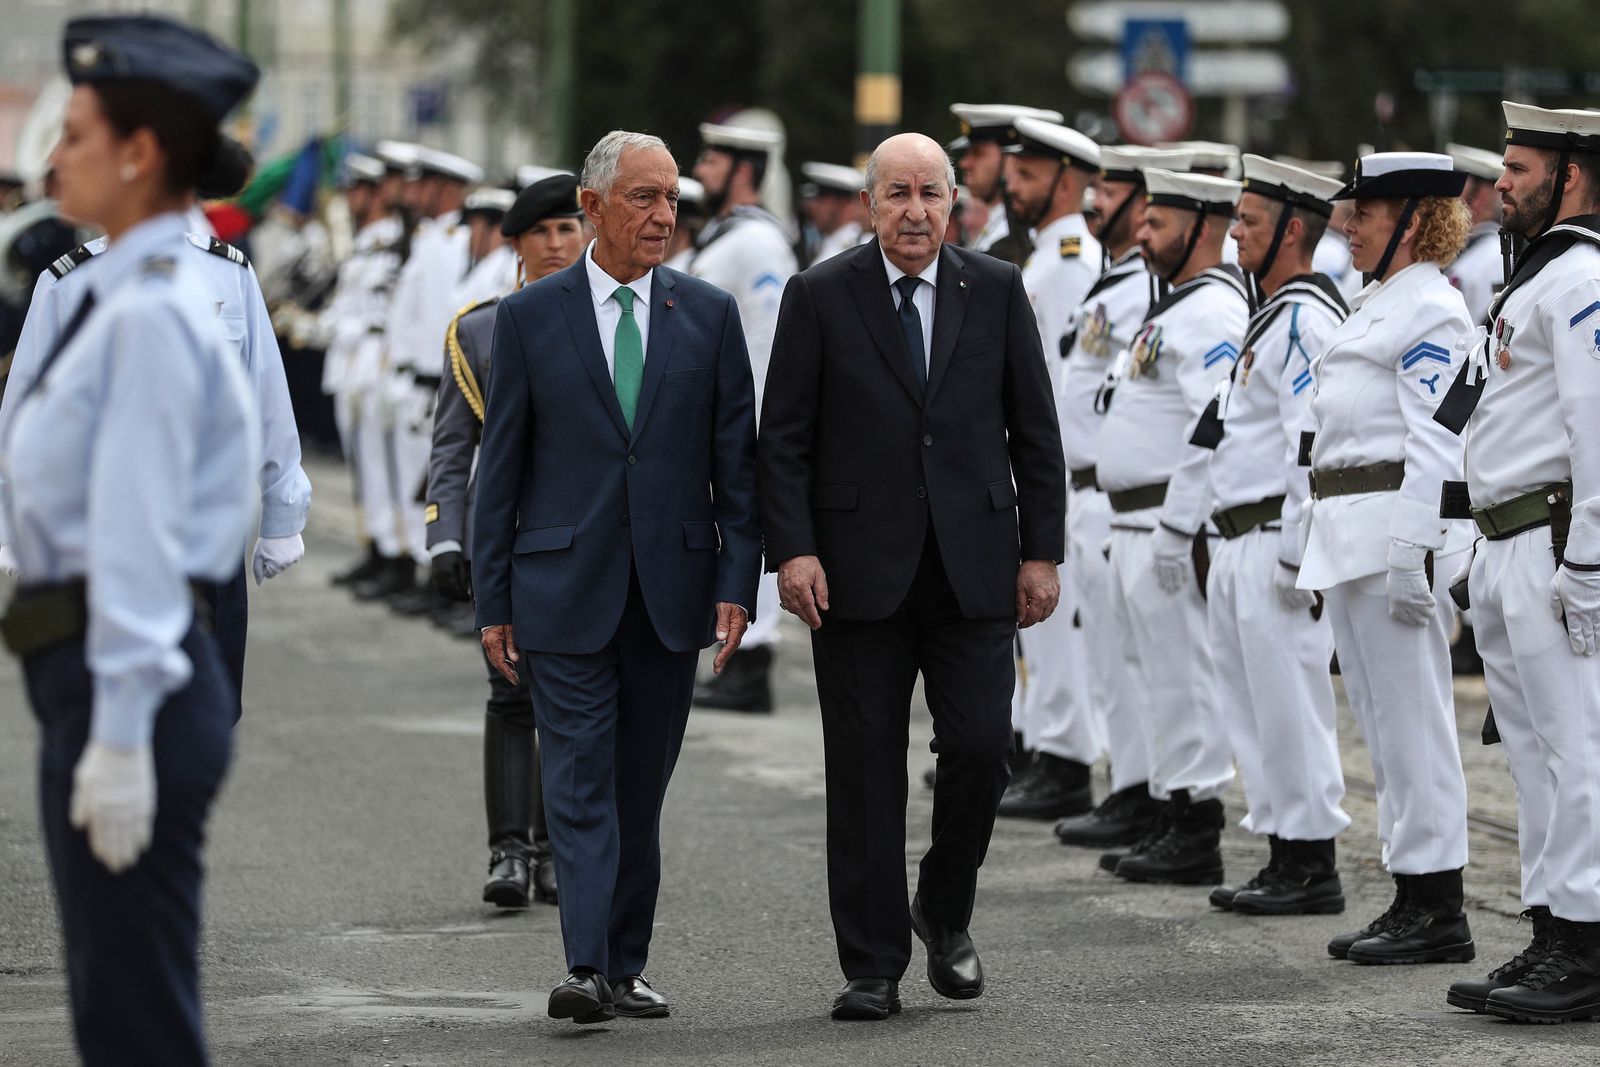 Portugual's President Marcelo Rebelo de Sousa and Algeria's President Abdelmadjid Tebboune (L) review the troops at the Jeronimos Monastery in Lisbon on May 23, 2023. (Photo by CARLOS COSTA / AFP) - AFP